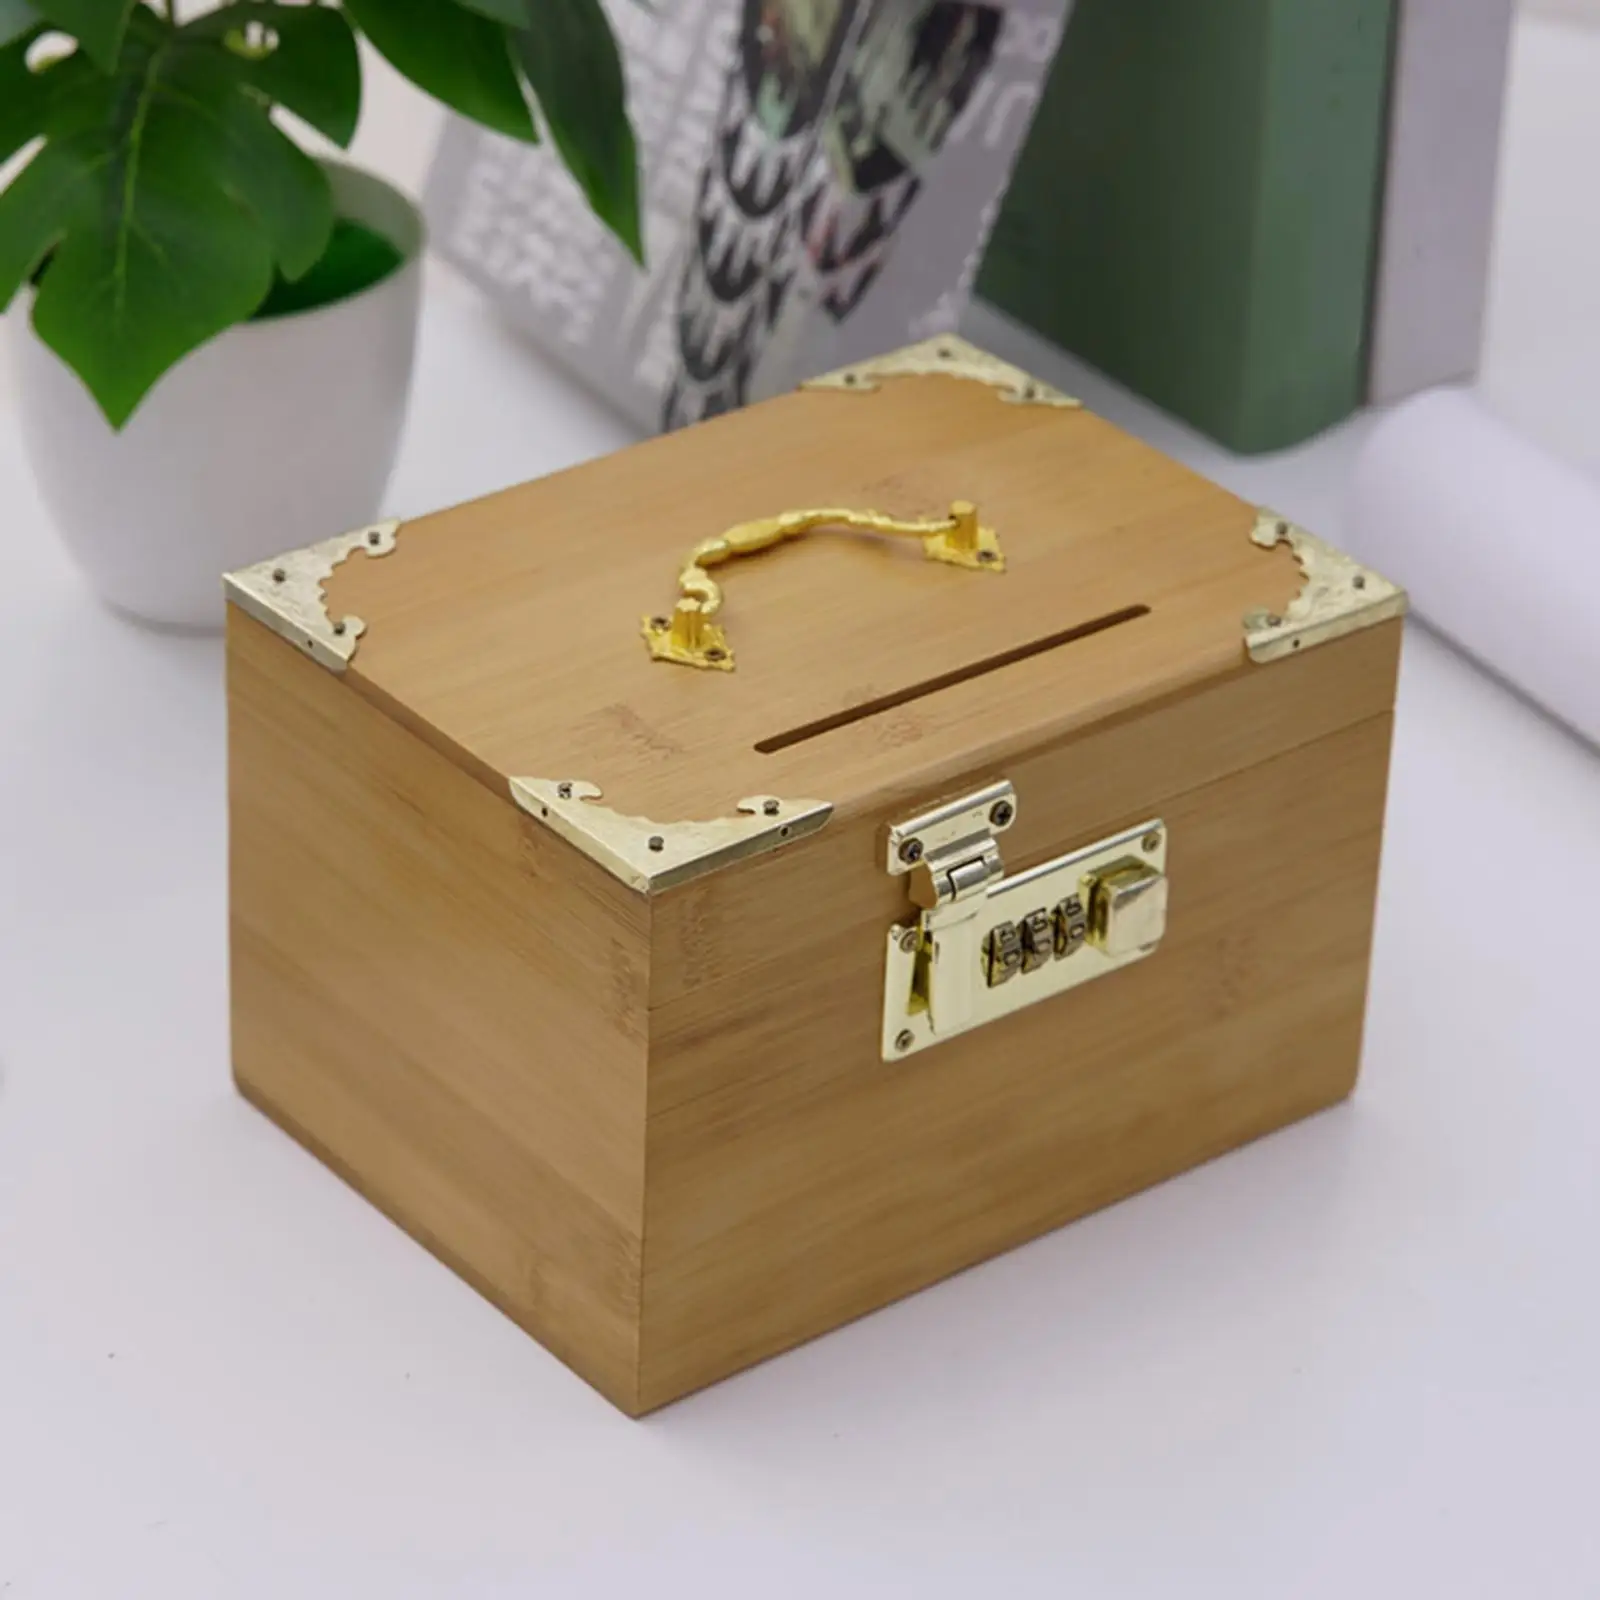 Vintage Wooden Piggy Bank with Lock Decorative Coin Box Jewelry Box Free Standing Retro Treasure Chest for Card Coin Home Decor